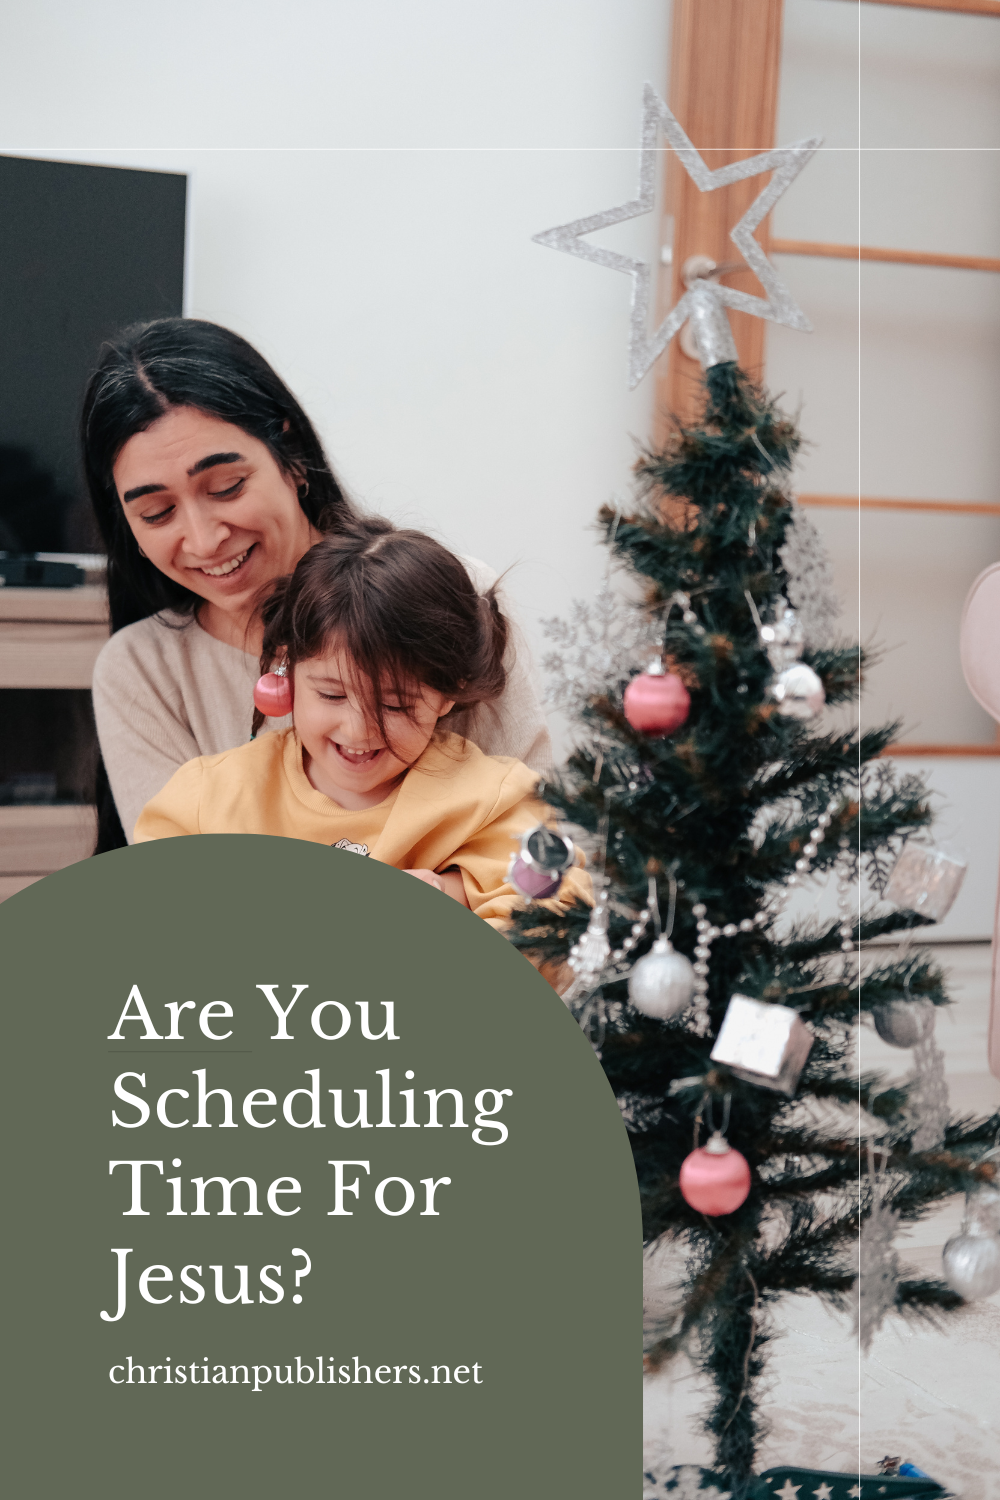 Are You Scheduling Time For Jesus?